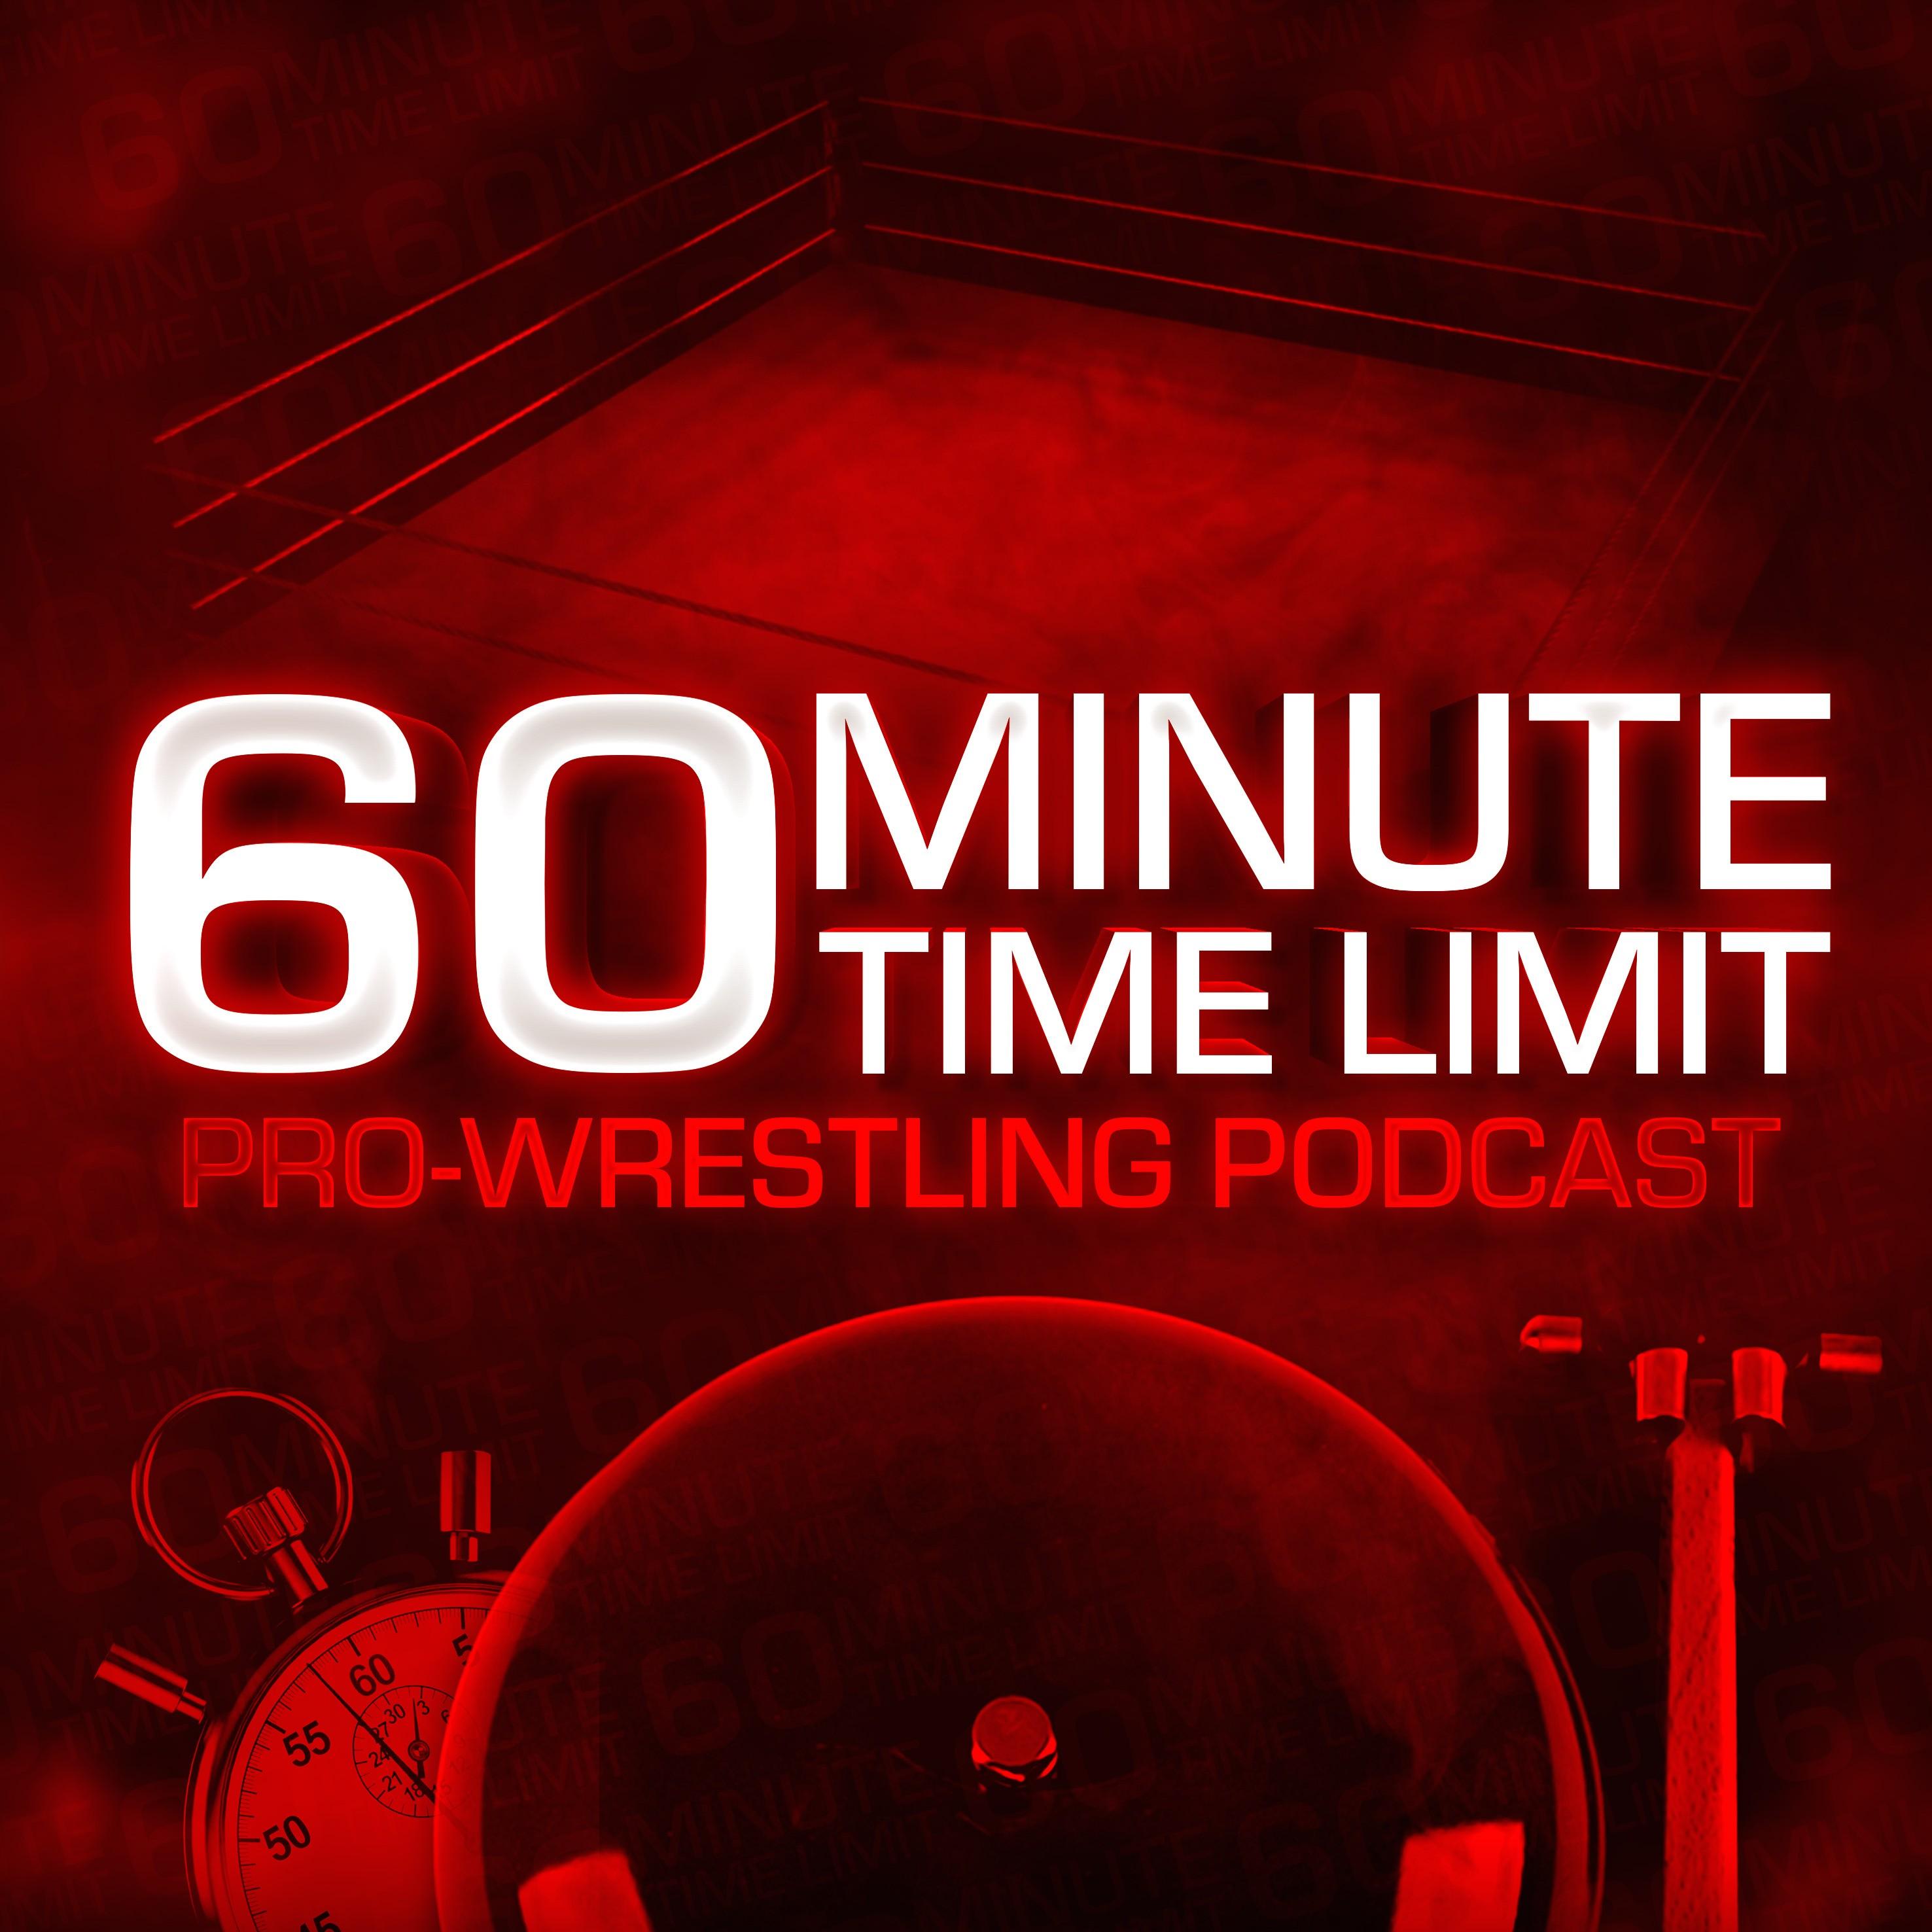 Sixty Minute Time Limit Pro Wrestling Podcast